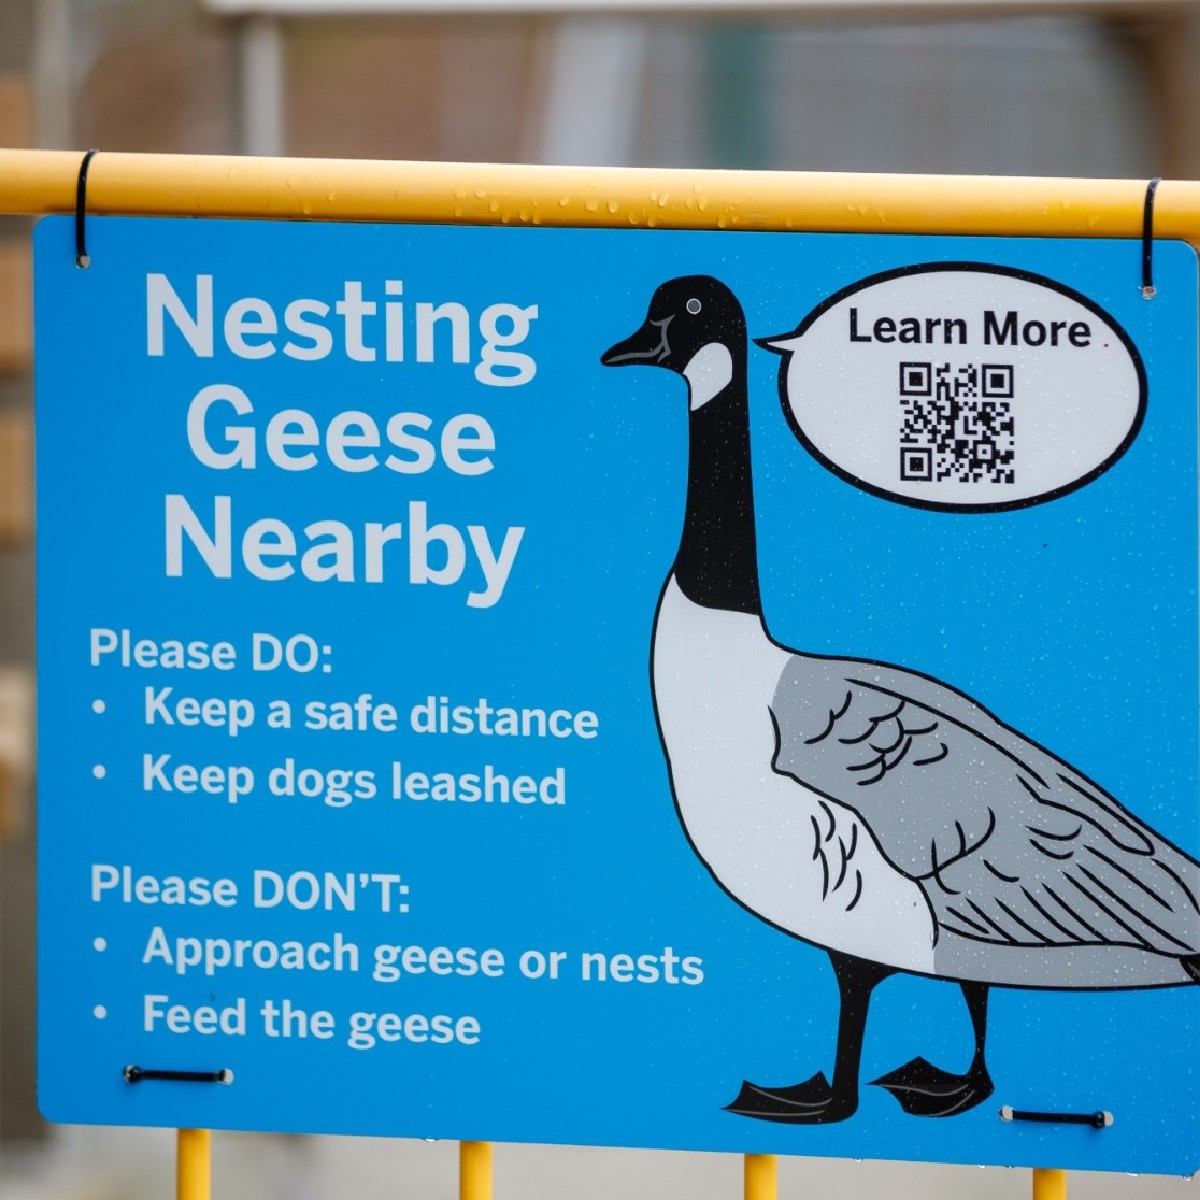 It's nesting season for Canada geese at #WesternU. Here are some tips to stay safe while sharing campus with them: 👉 Keep a safe distance & back away if a goose approaches you 👉 Do not feed them 👉 Report a concern or nesting site to @westernufm More: uwo.ca/fm/notices/sha…